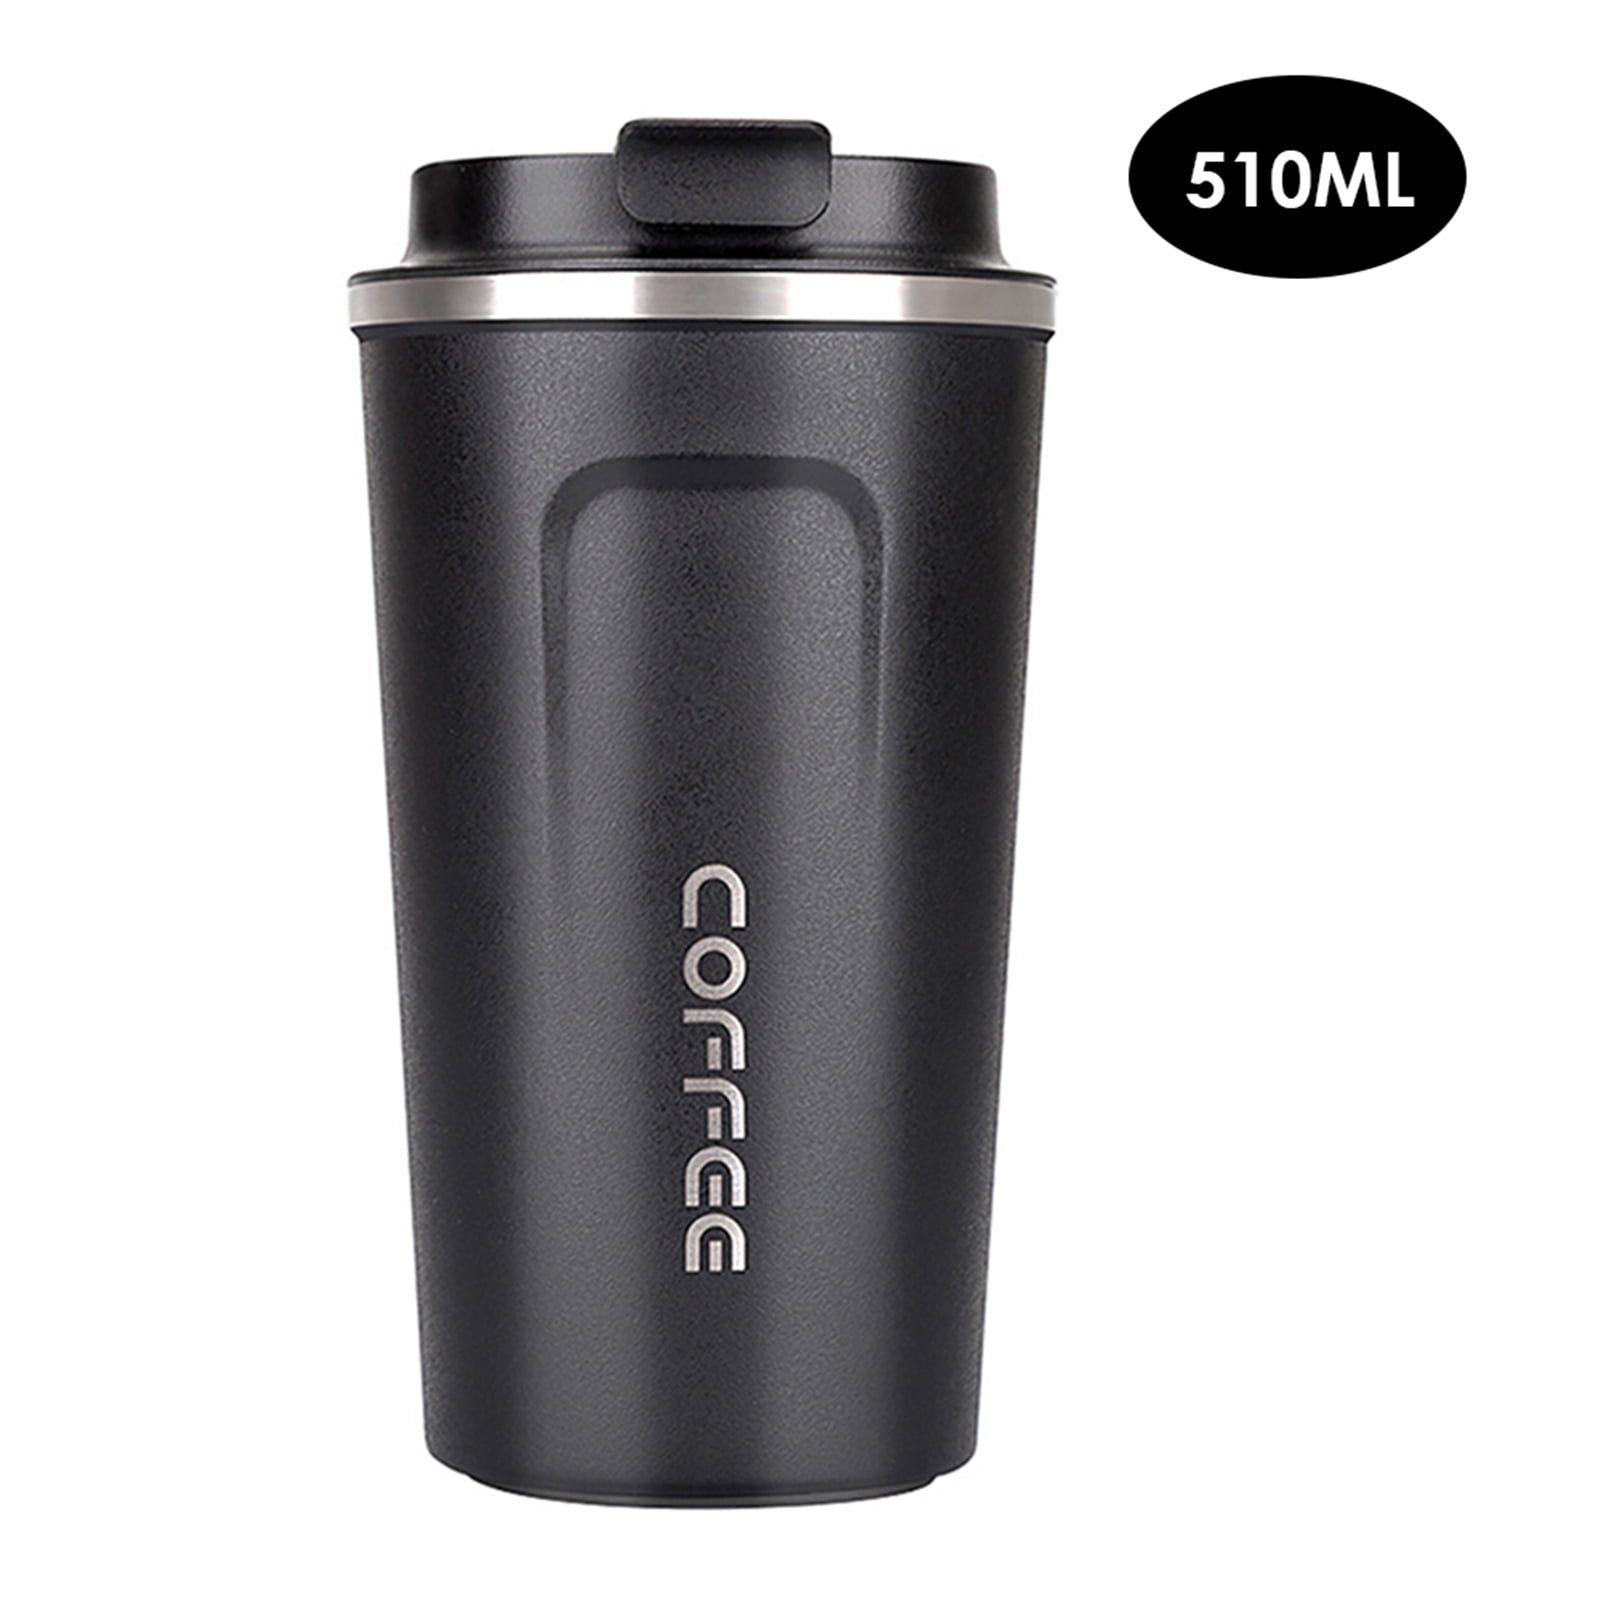 Stainless Steel Coffee Thermos Bottle For Tesla Model 3 Model X S Y Thermal  Mug Vacuum Insulated Cup Tea Cup Hiking Portable